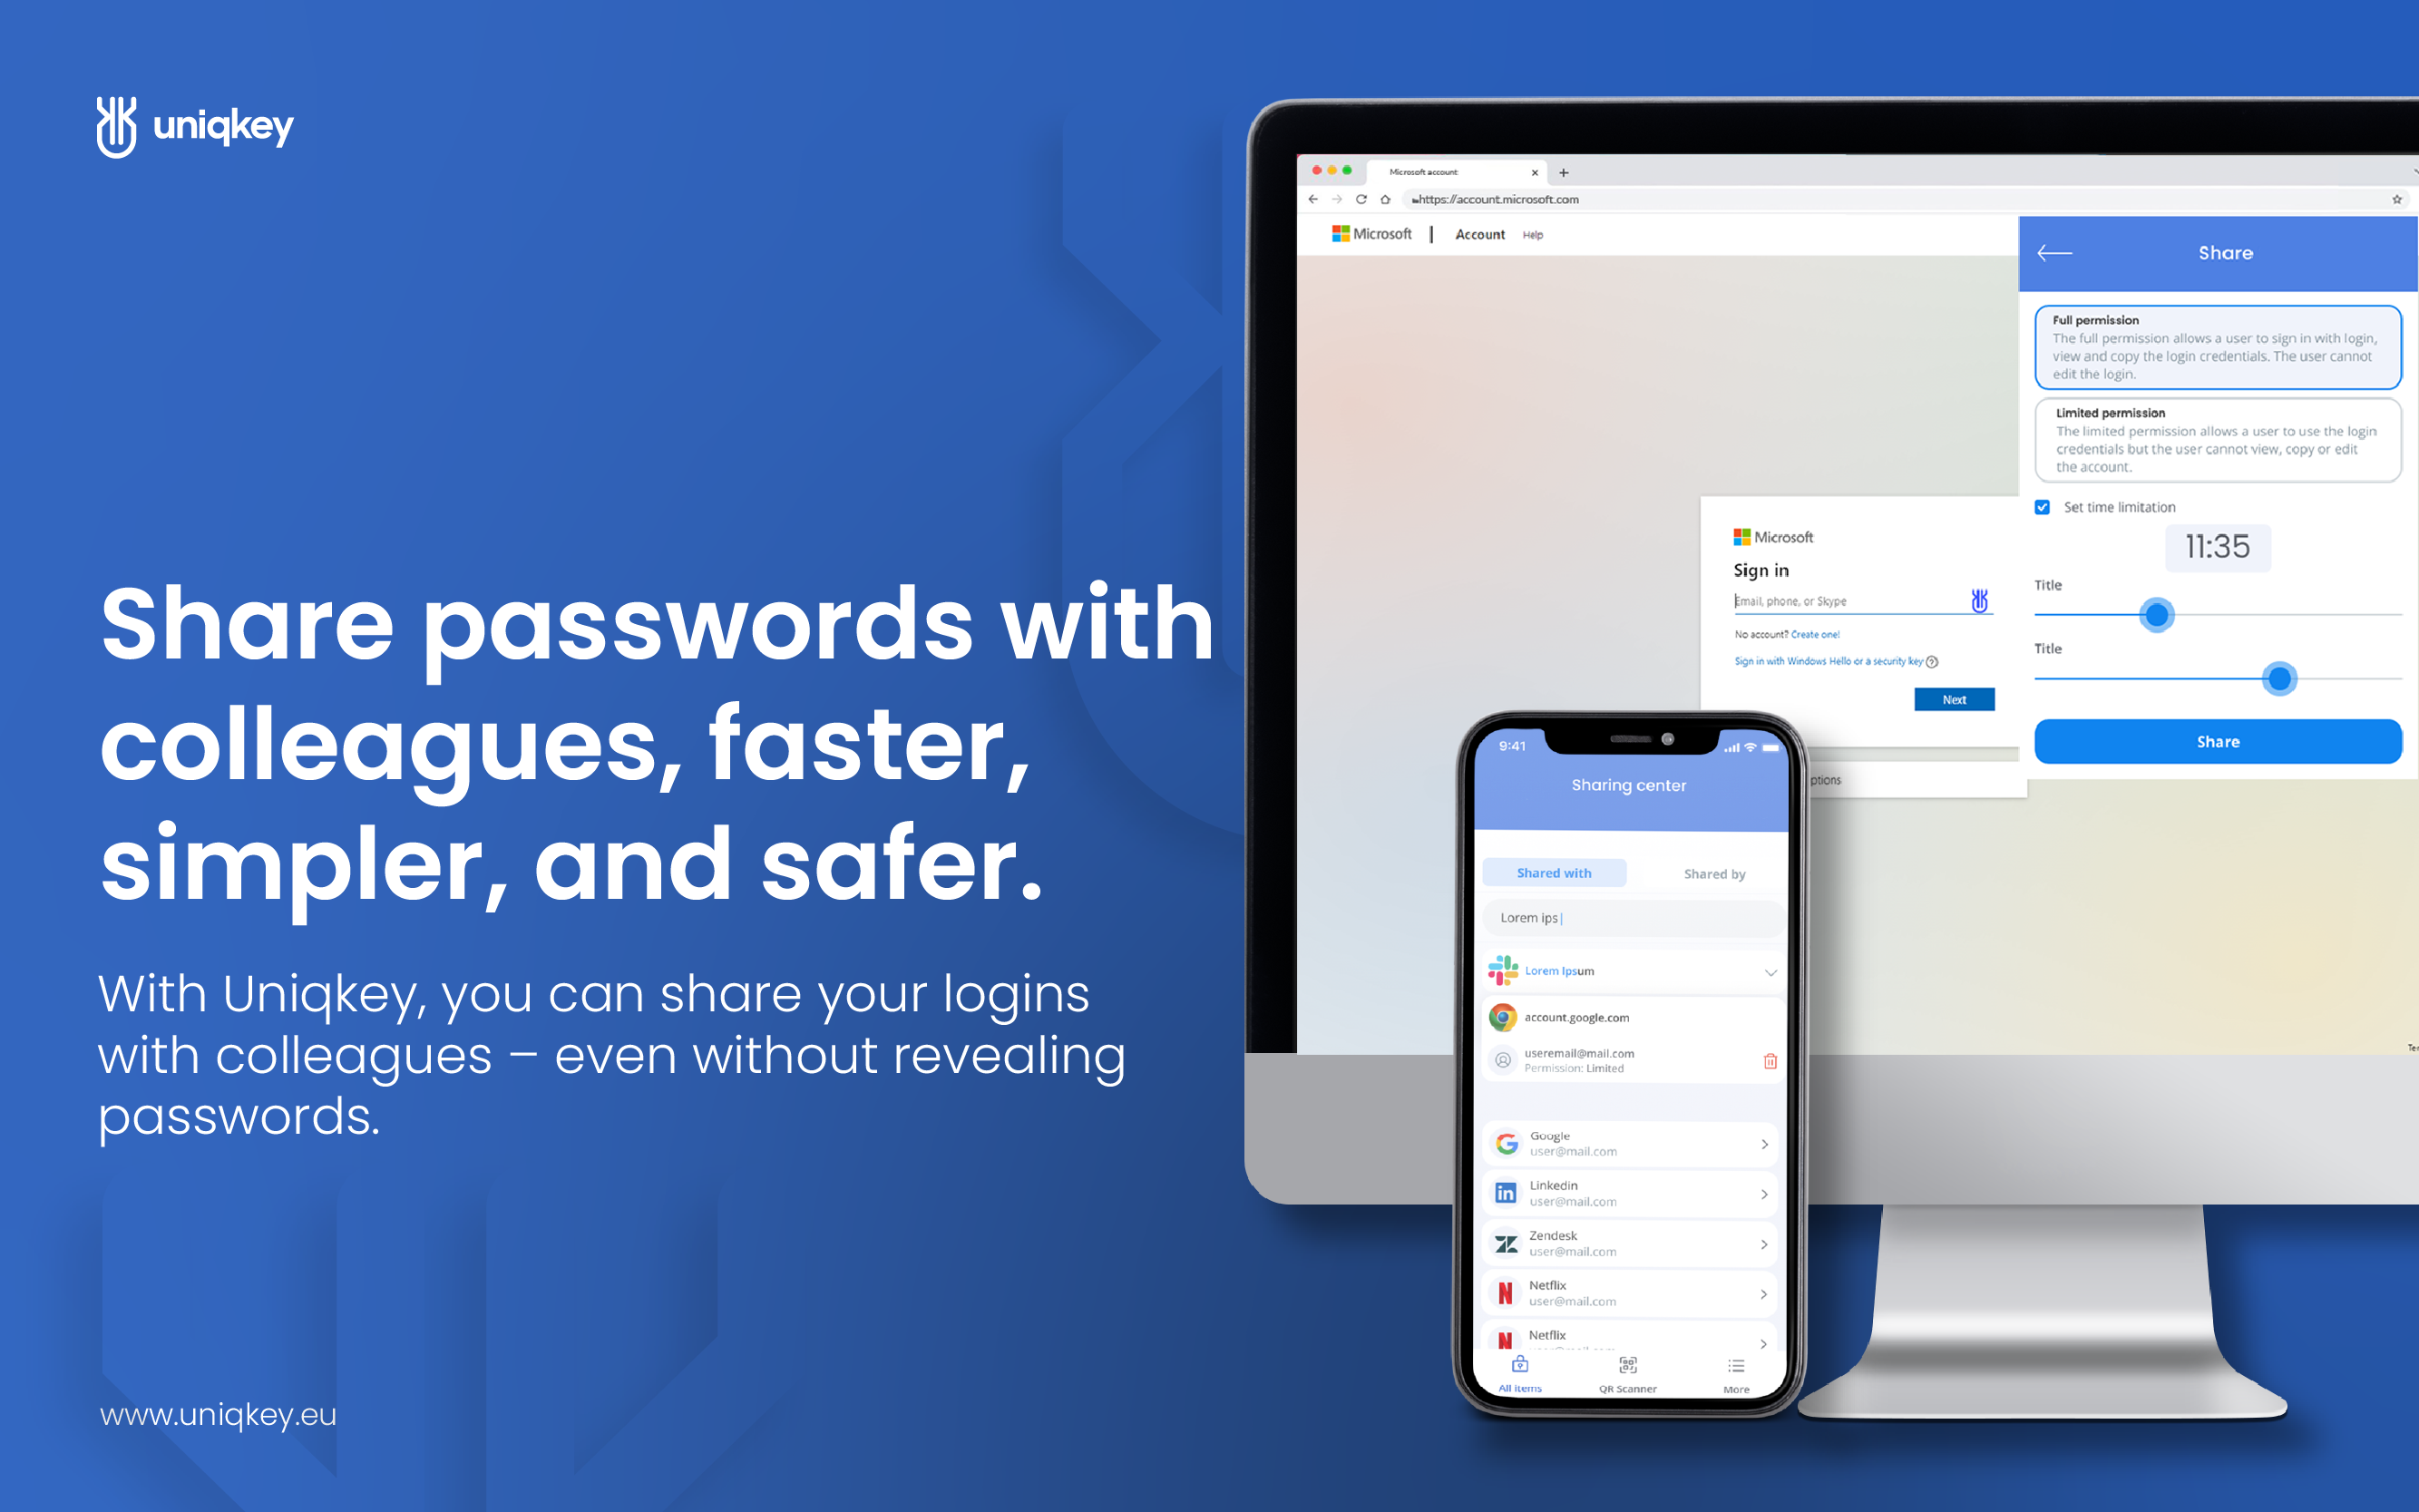 share access to services without revealing password